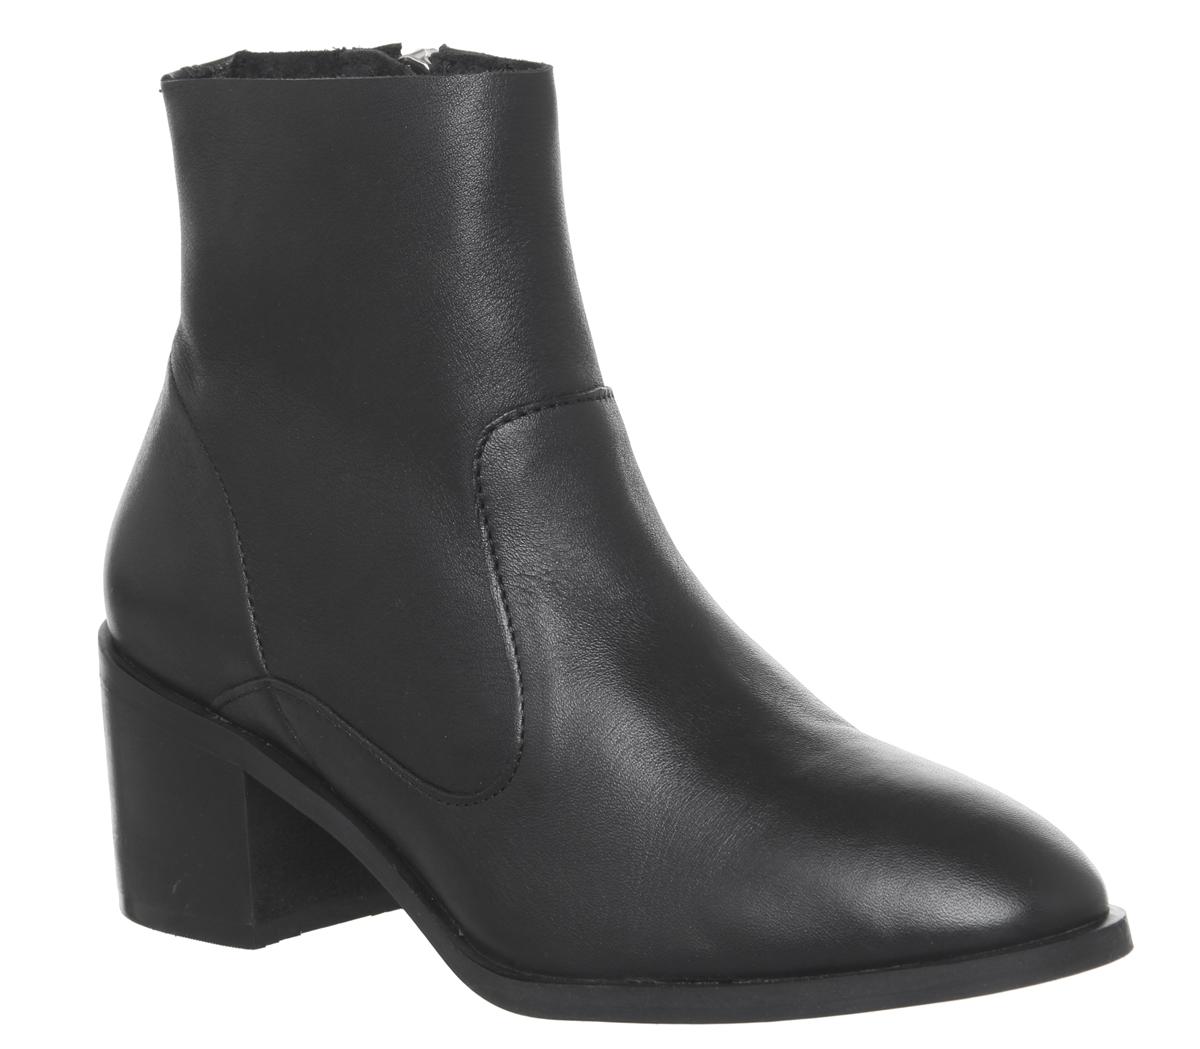 OFFICE Alford Unlined Block Heel Boots Black Leather - Women's Boots